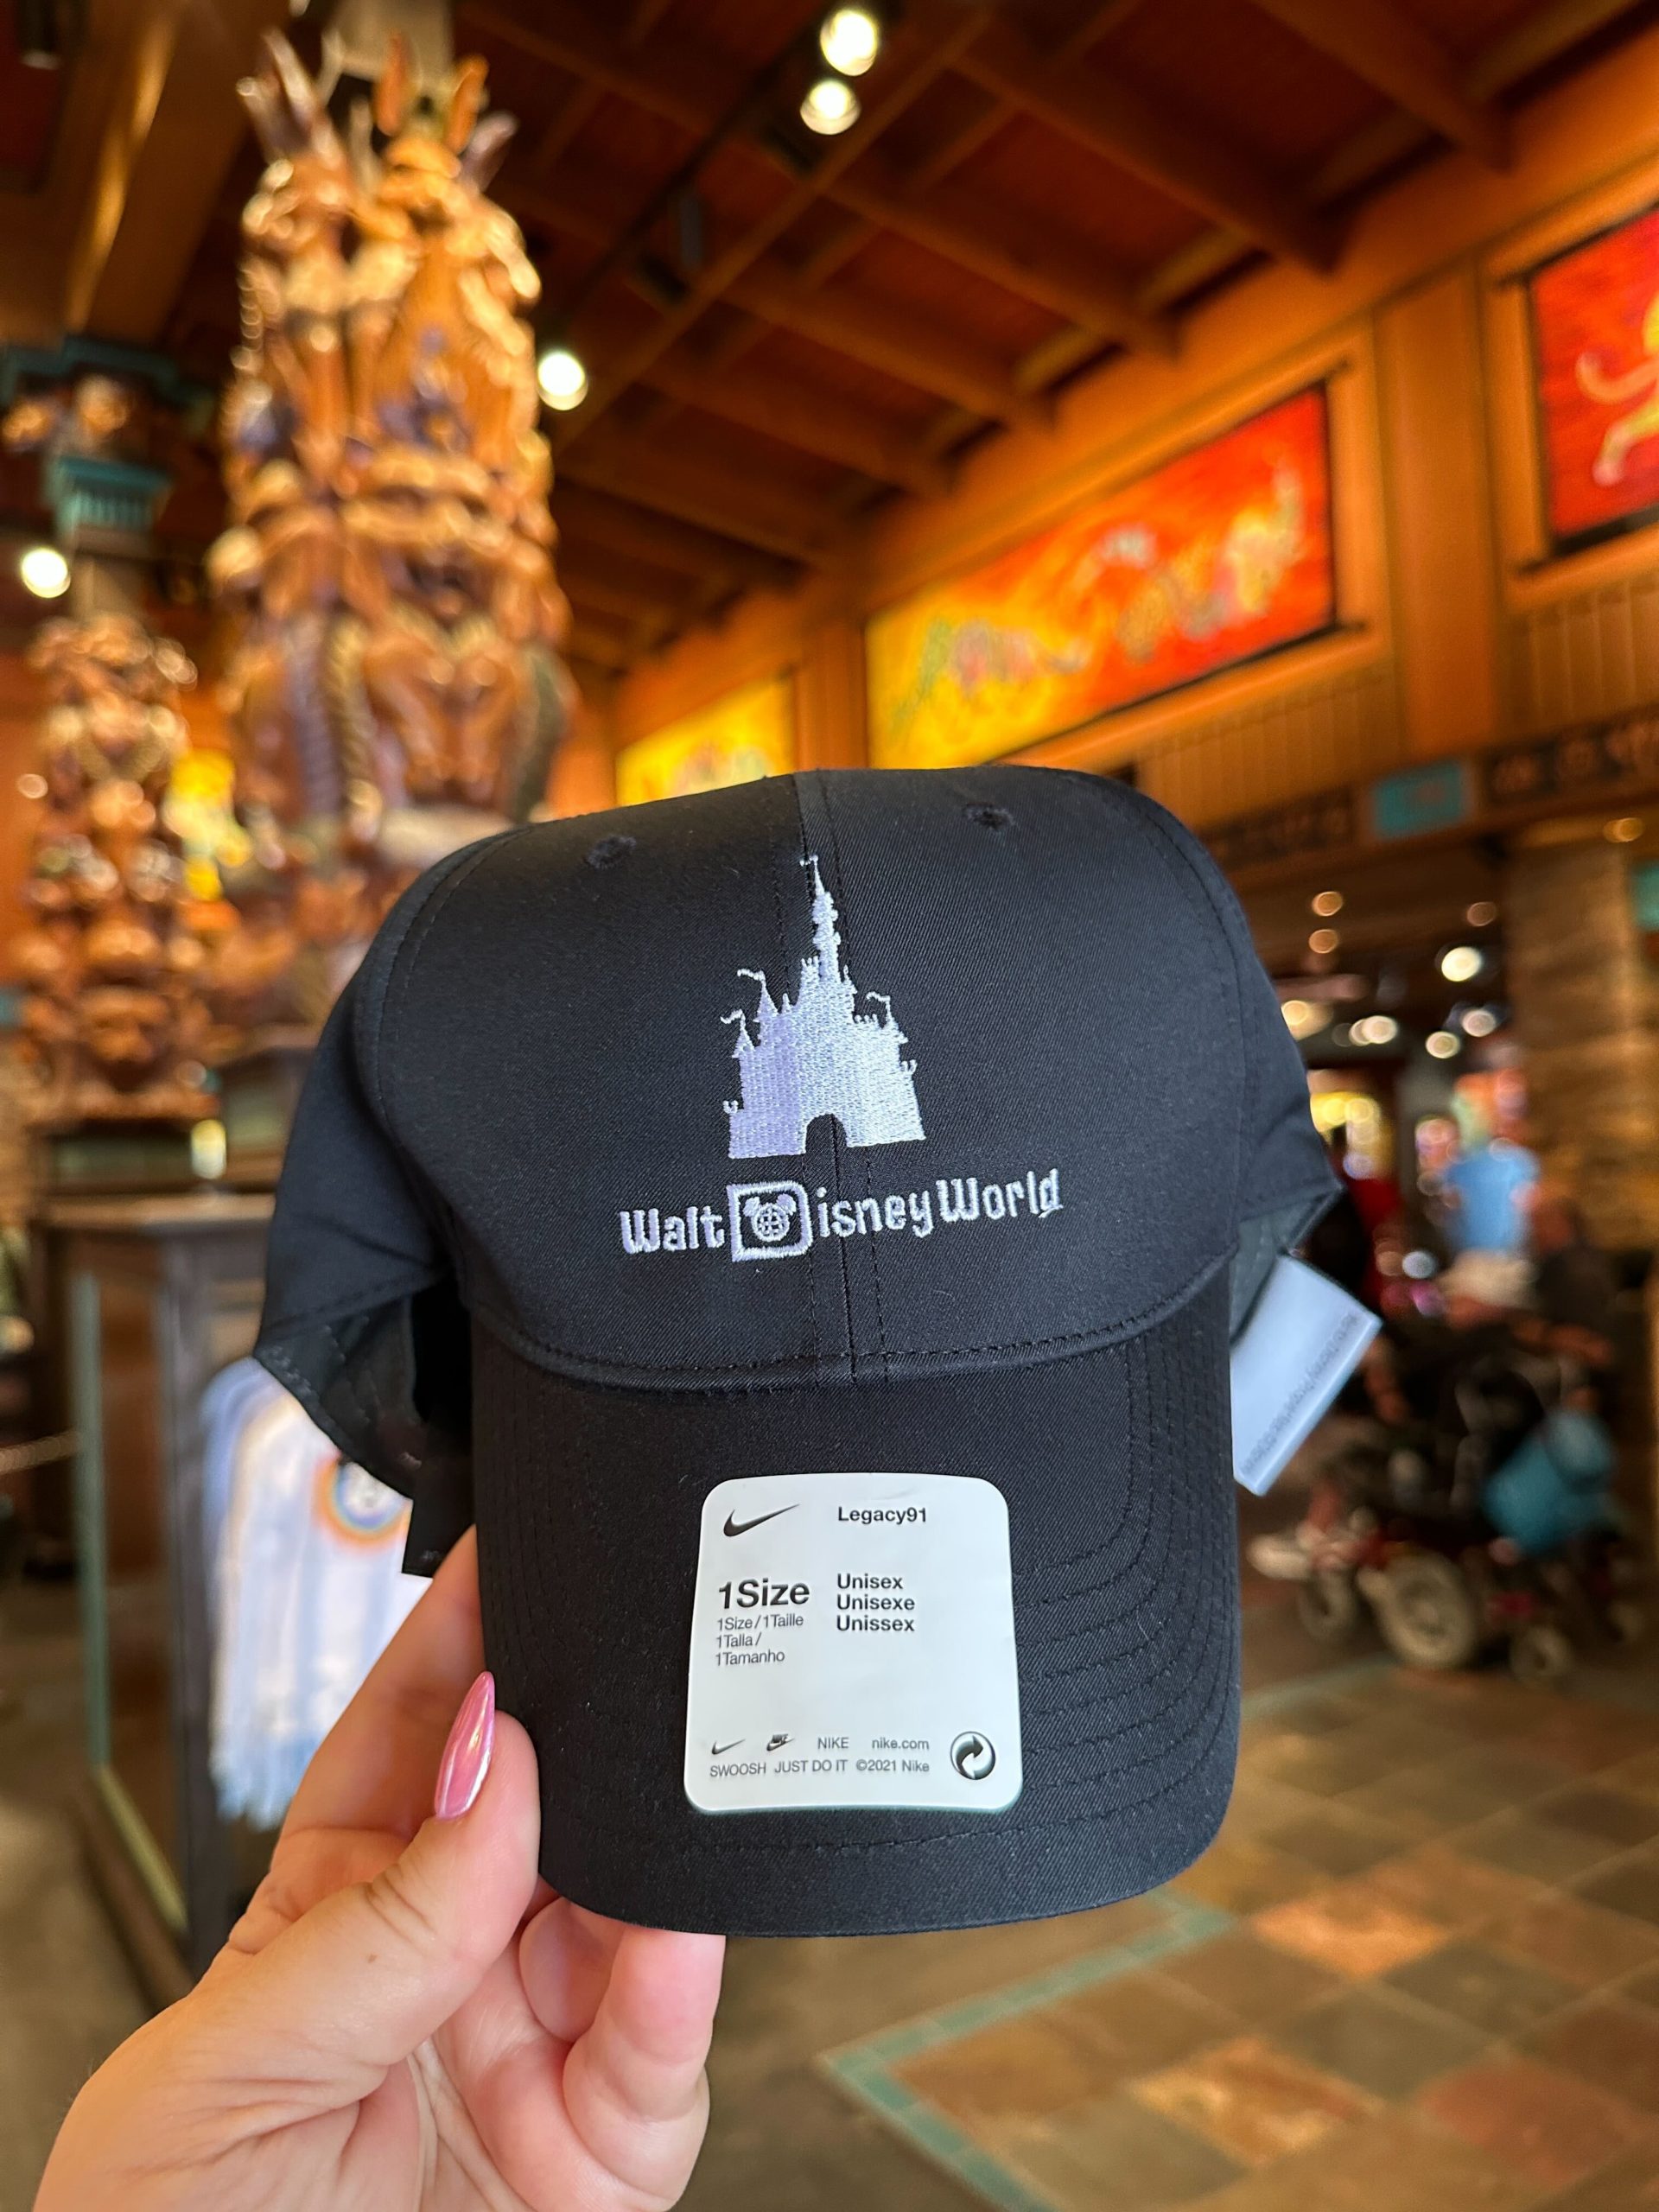 This New Nike Dri-Fit Hat is a Summer Essential at Walt Disney